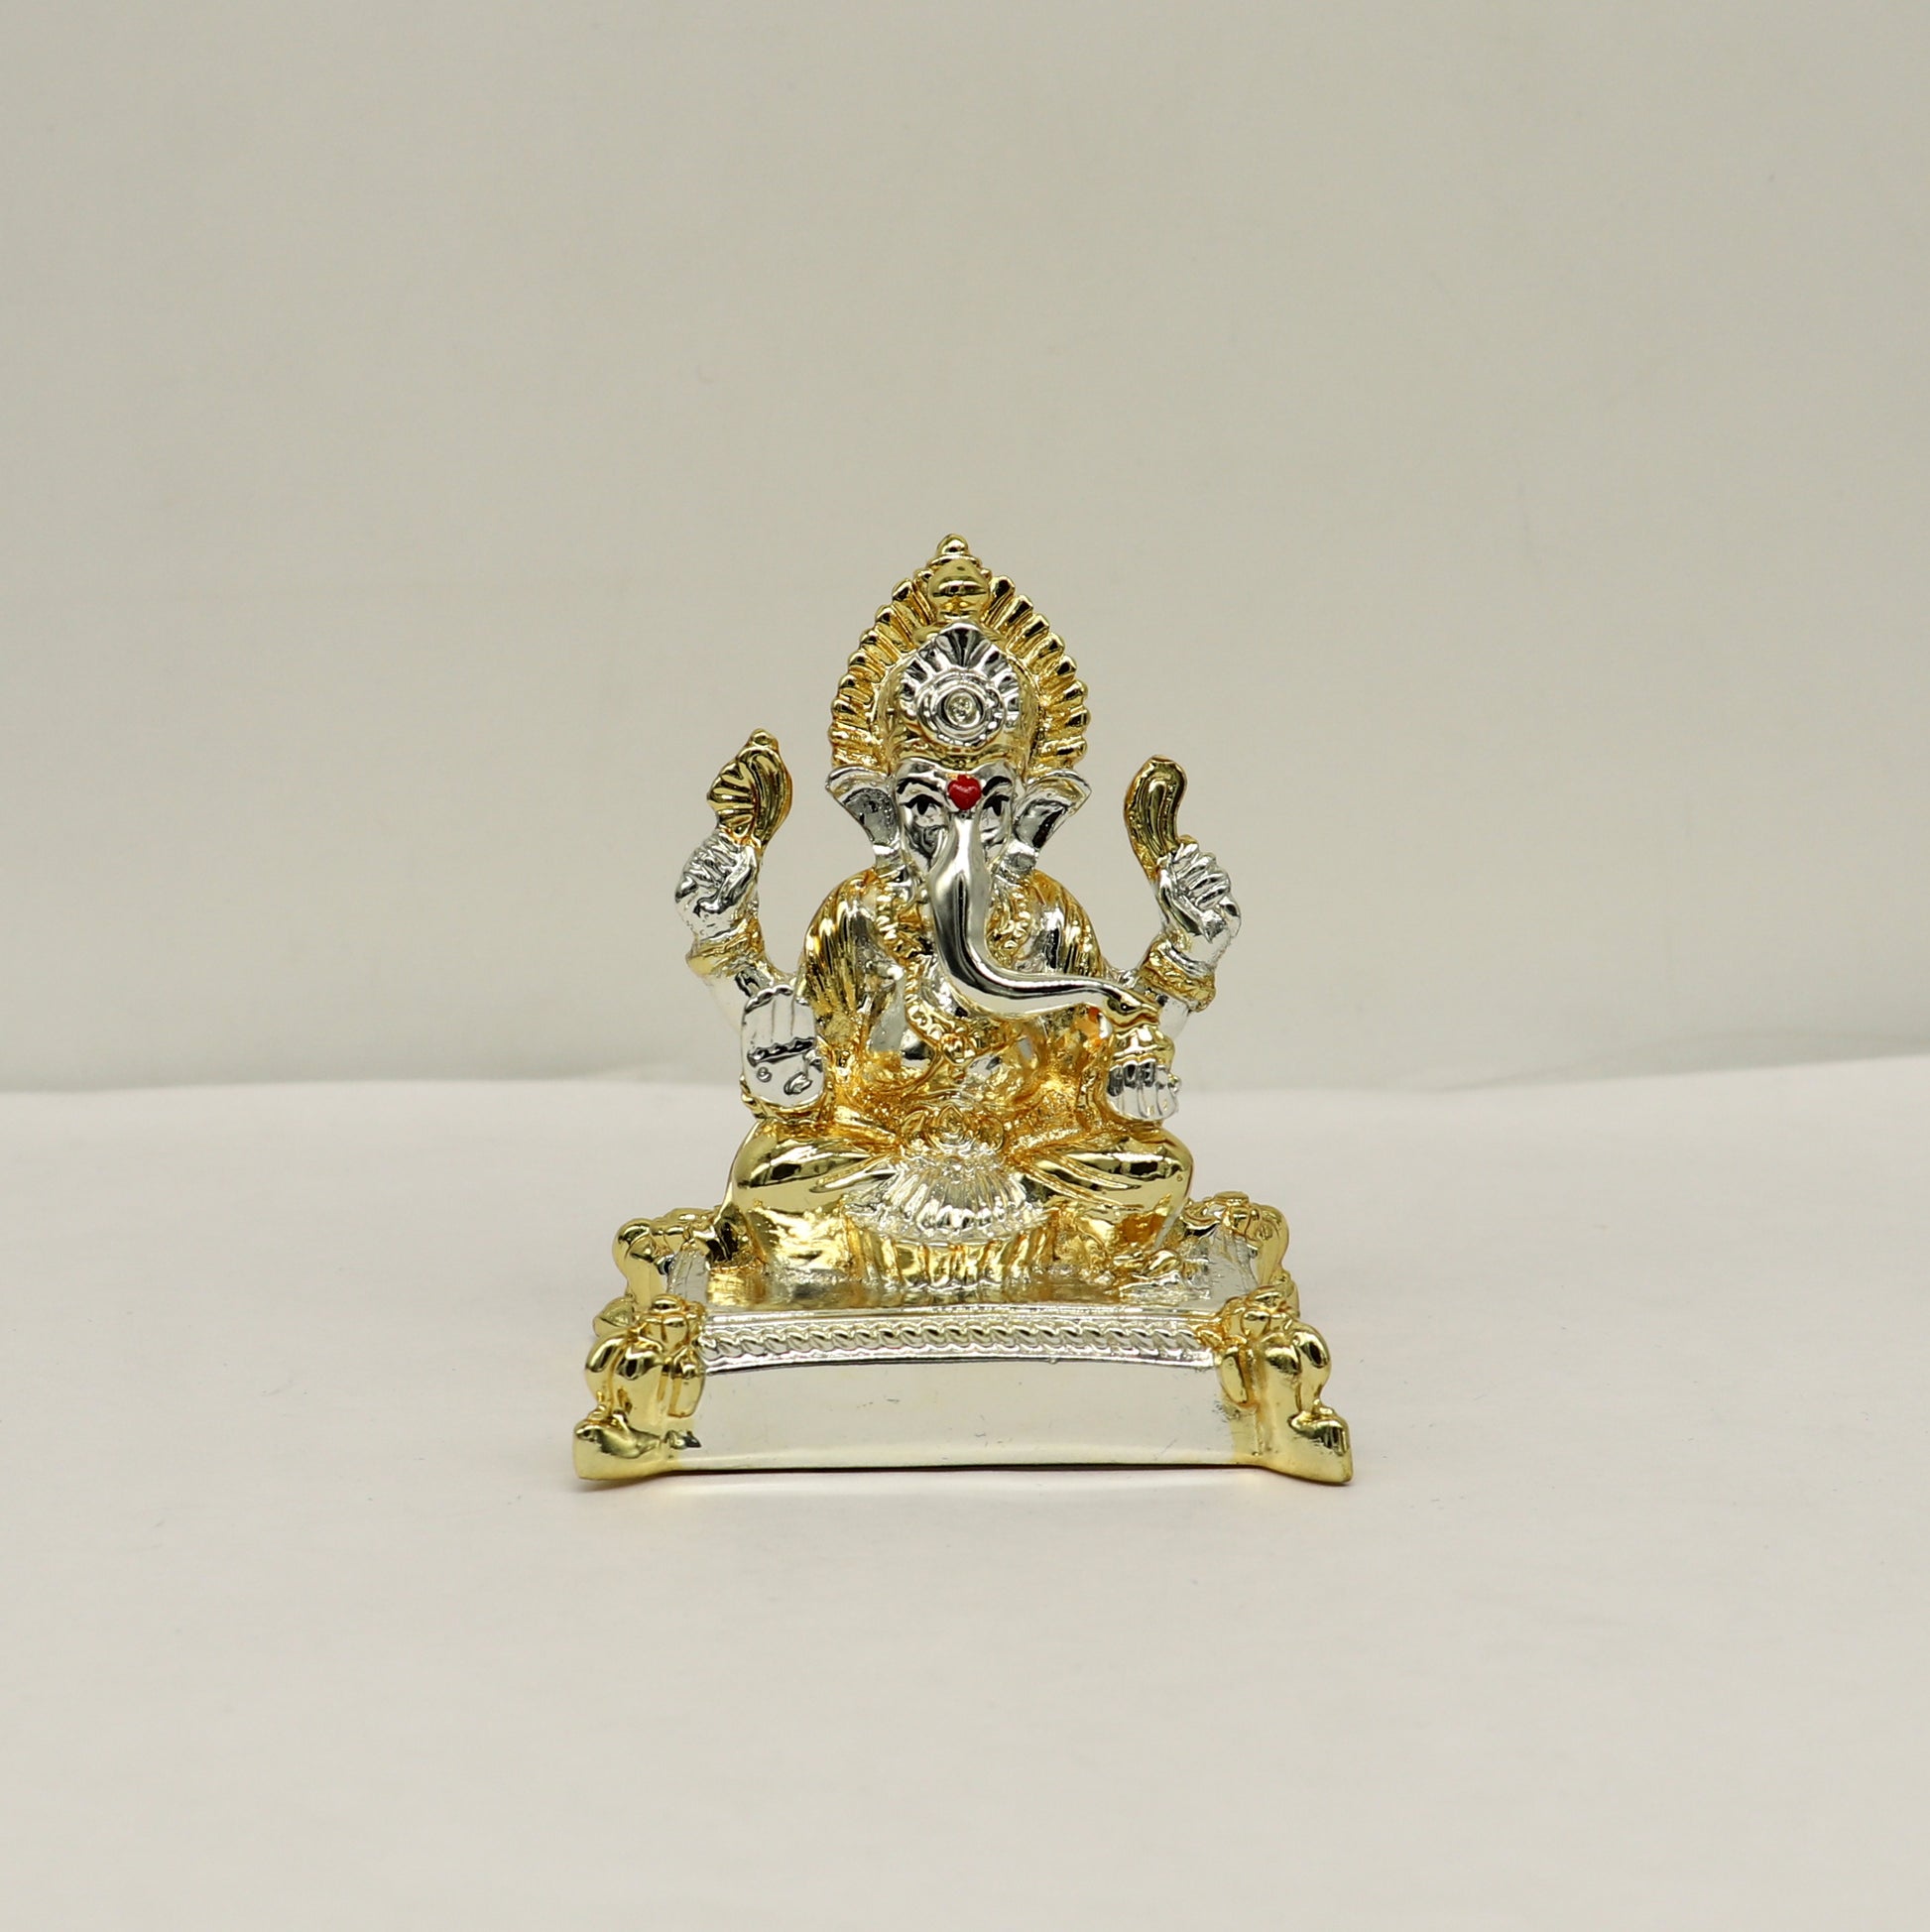 Silver Ganesh Outside Silver Covering Inside Wax and Marble Lord Ganesha Silver Idol W1 - TRIBAL ORNAMENTS